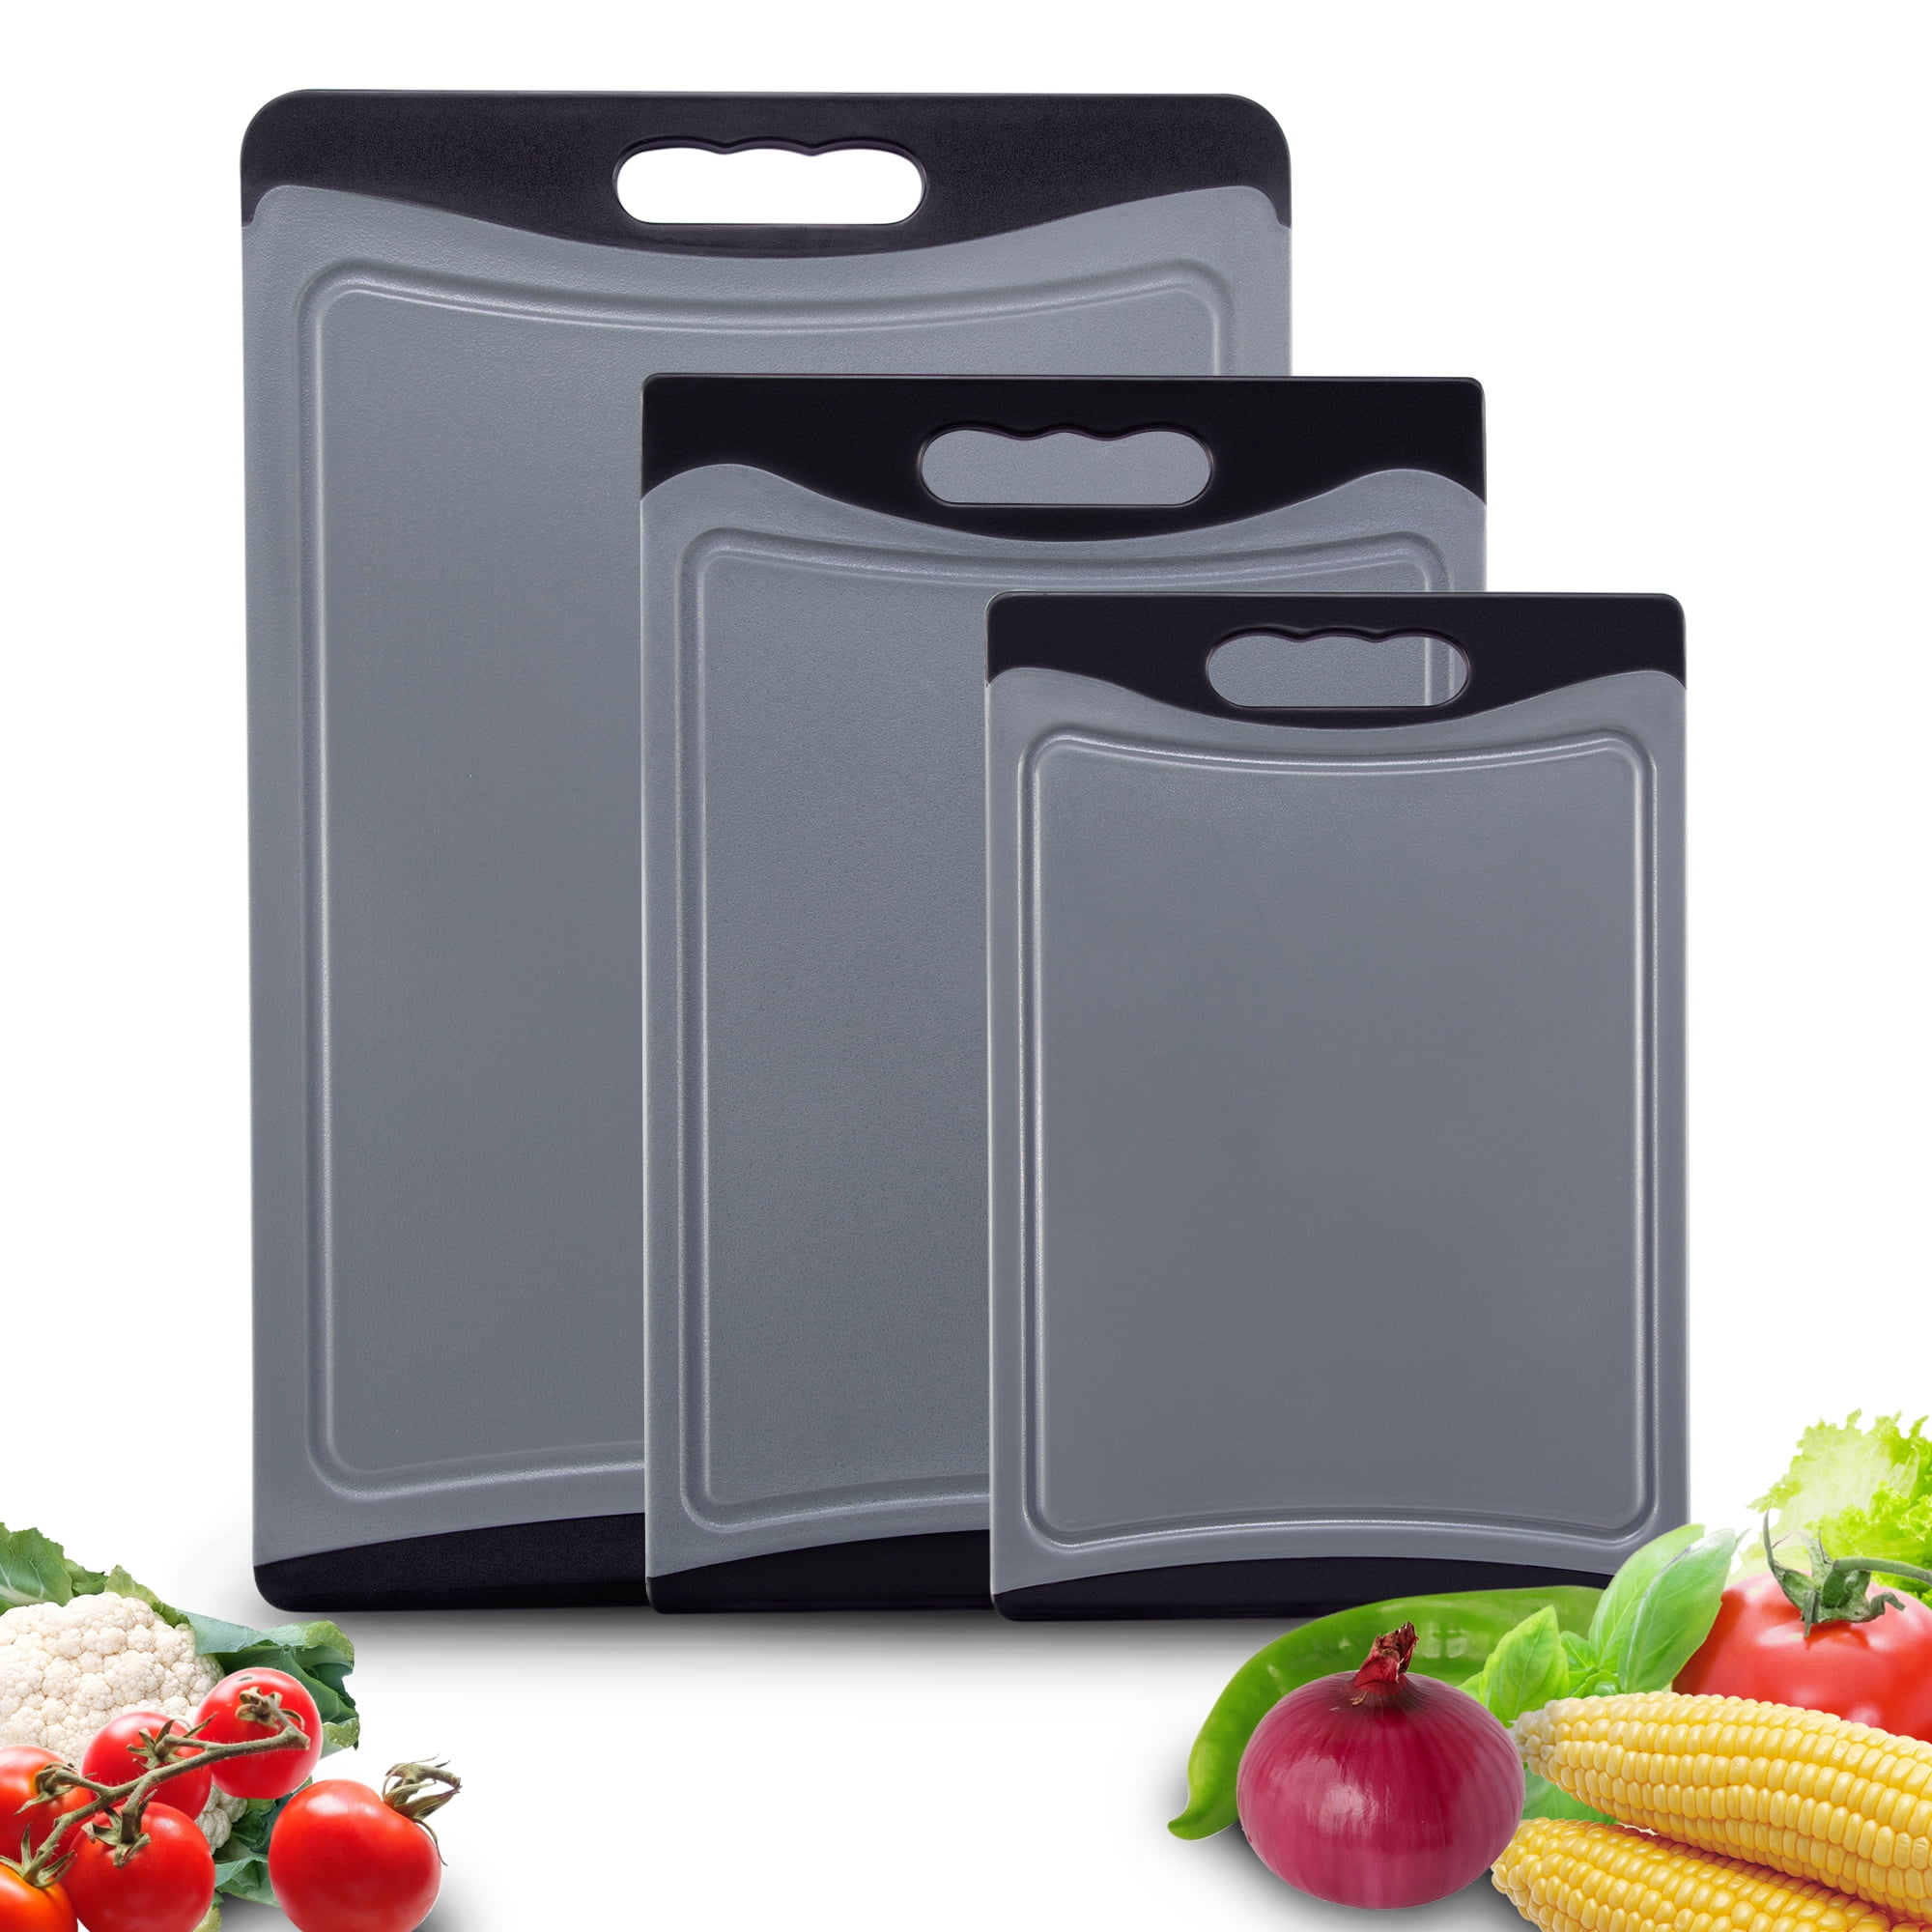 Cutting Boards for Kitchen Set of 3, Plastic Cutting Board Set